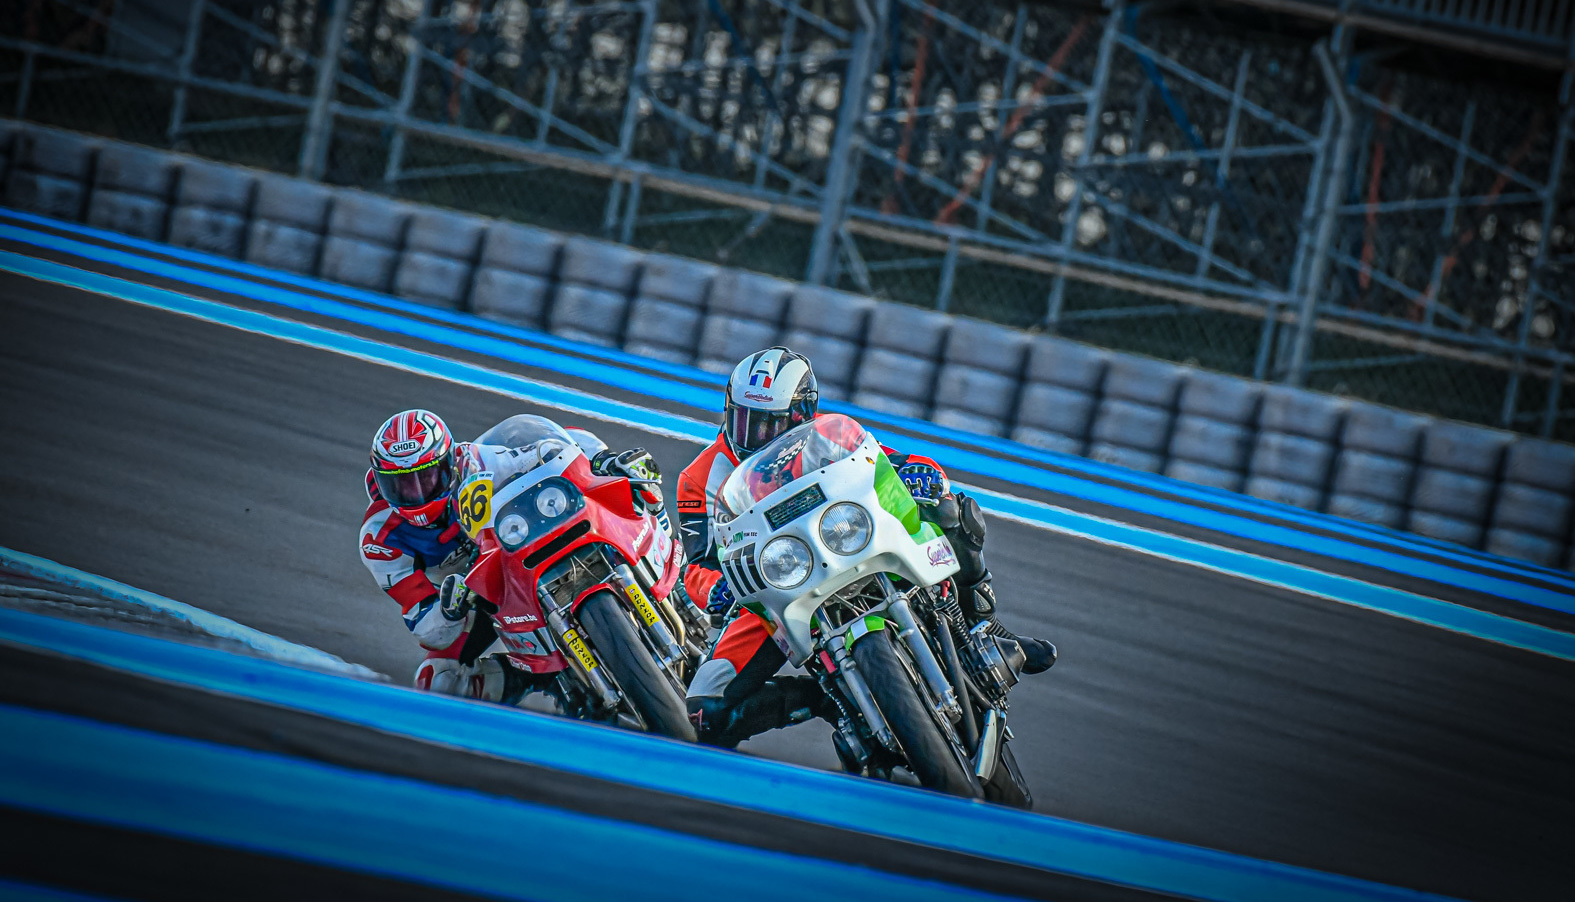 Race in the European Endurance Legends Cup - THE classic motorcycle endurance race that is going to be better than the rest